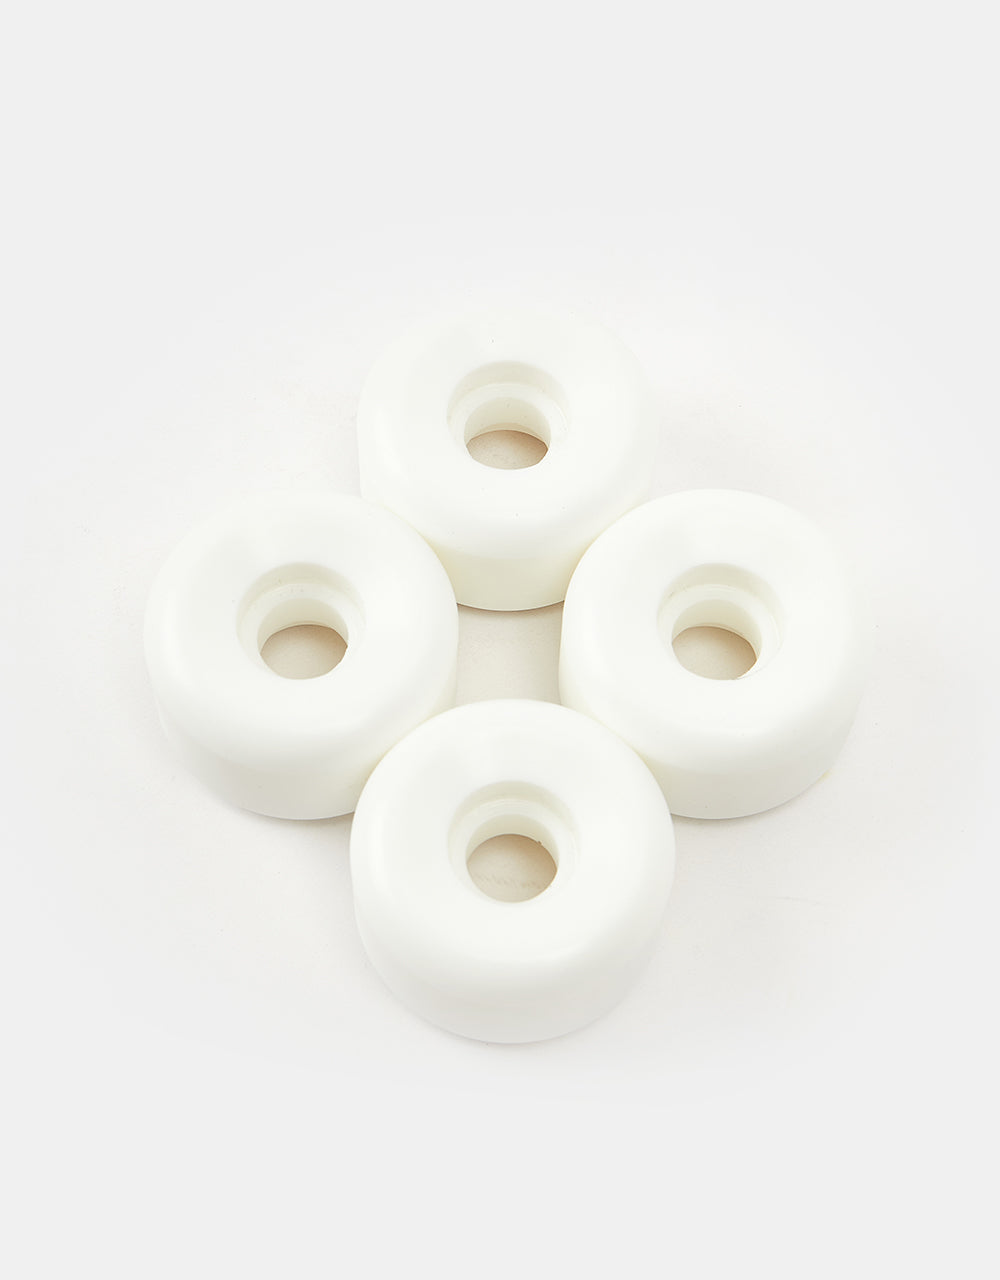 Orbs Specters Whites Conical 99a Skateboard Wheel - 53mm